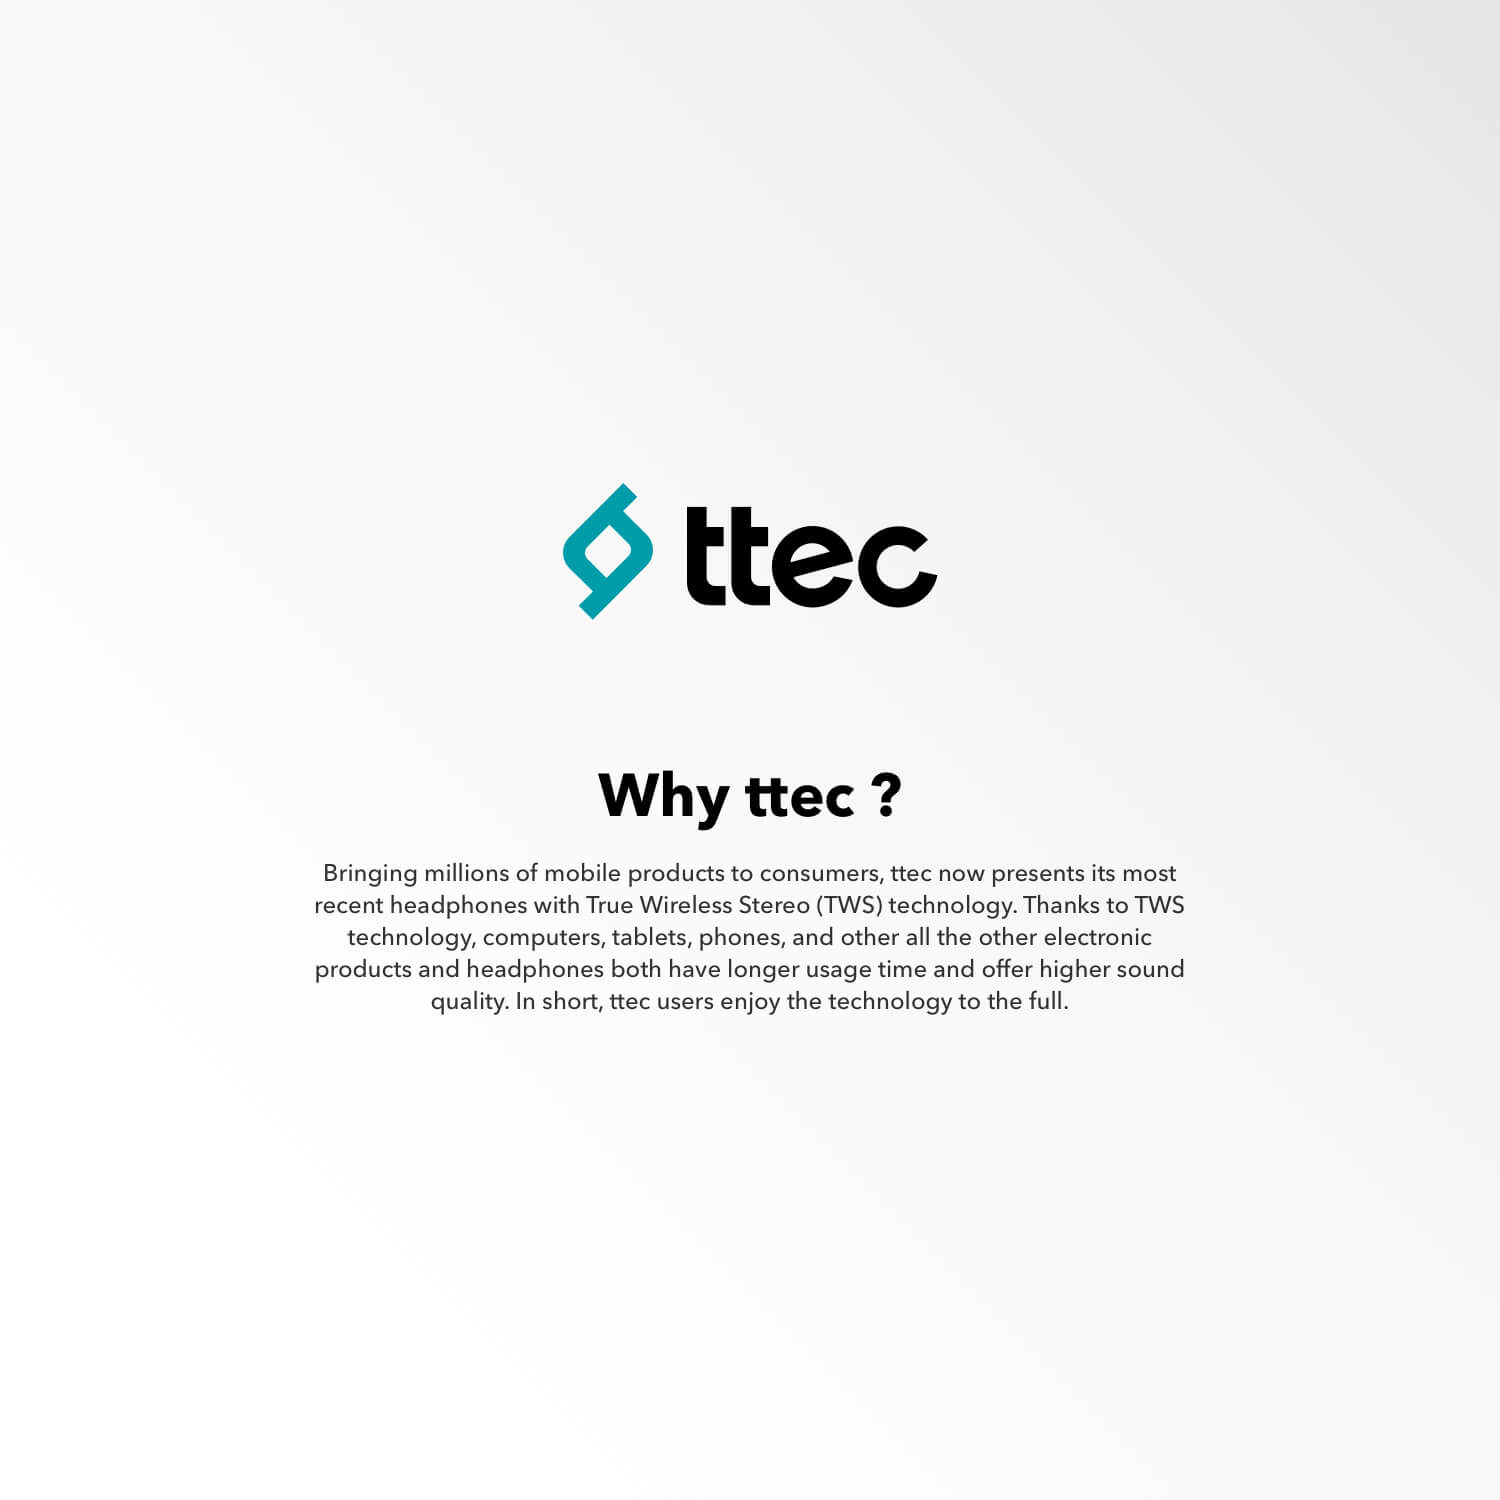 Why ttec for tws